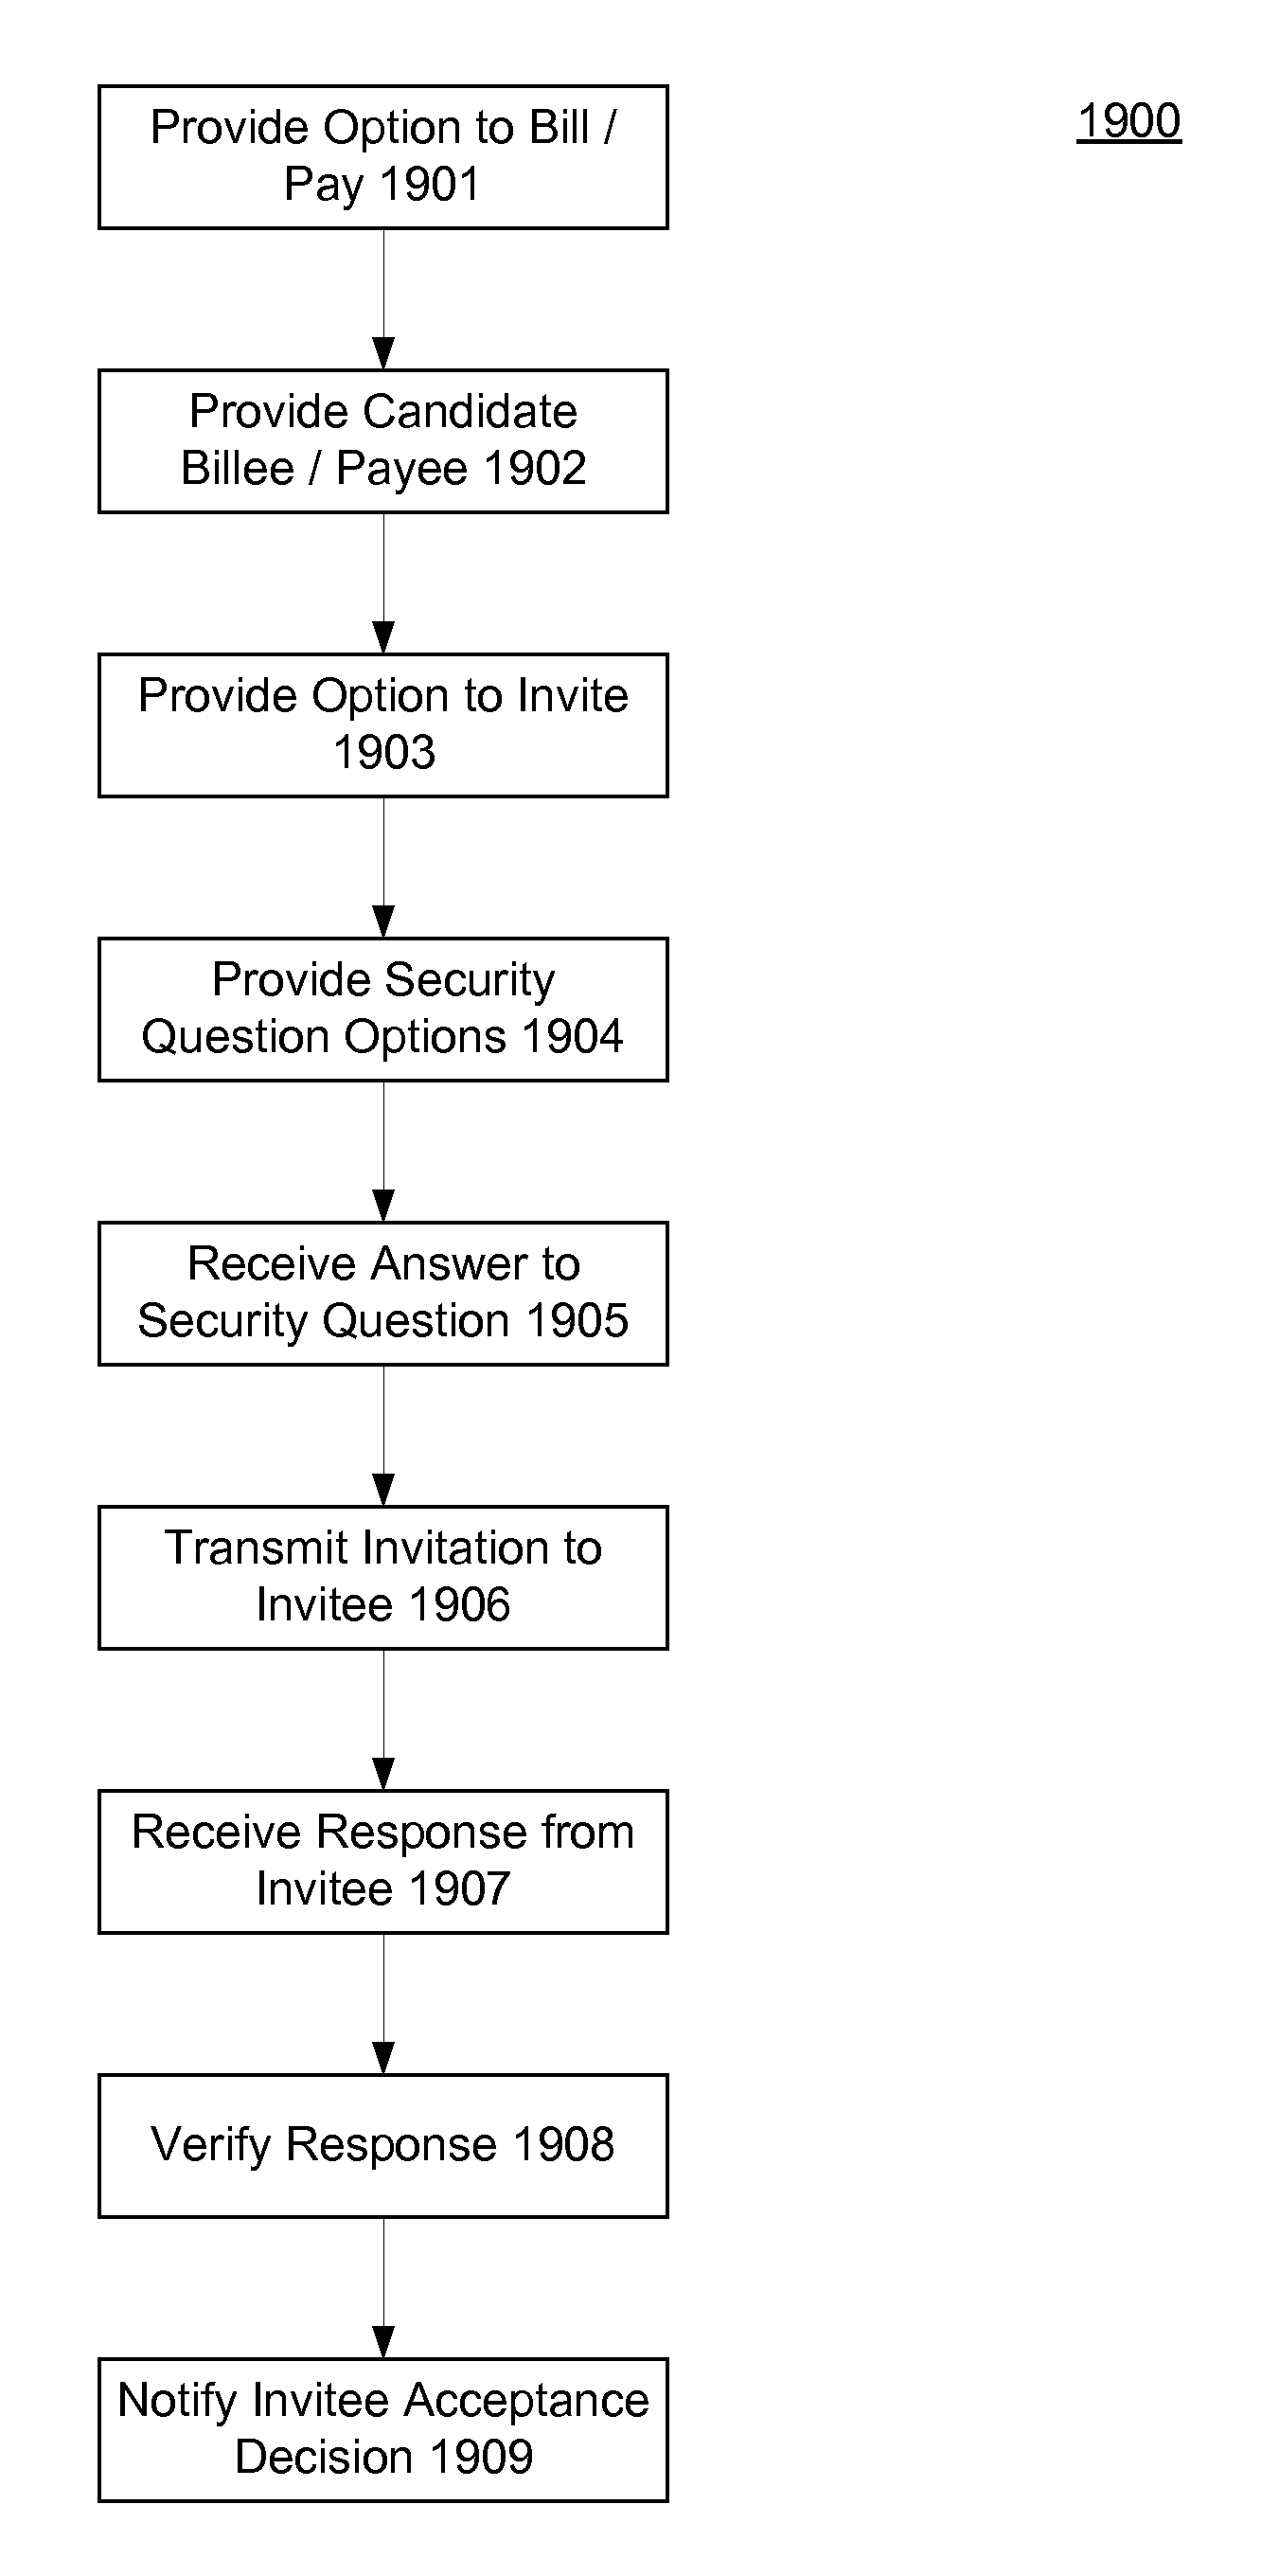 Enhanced invitation process for electronic billing and payment system